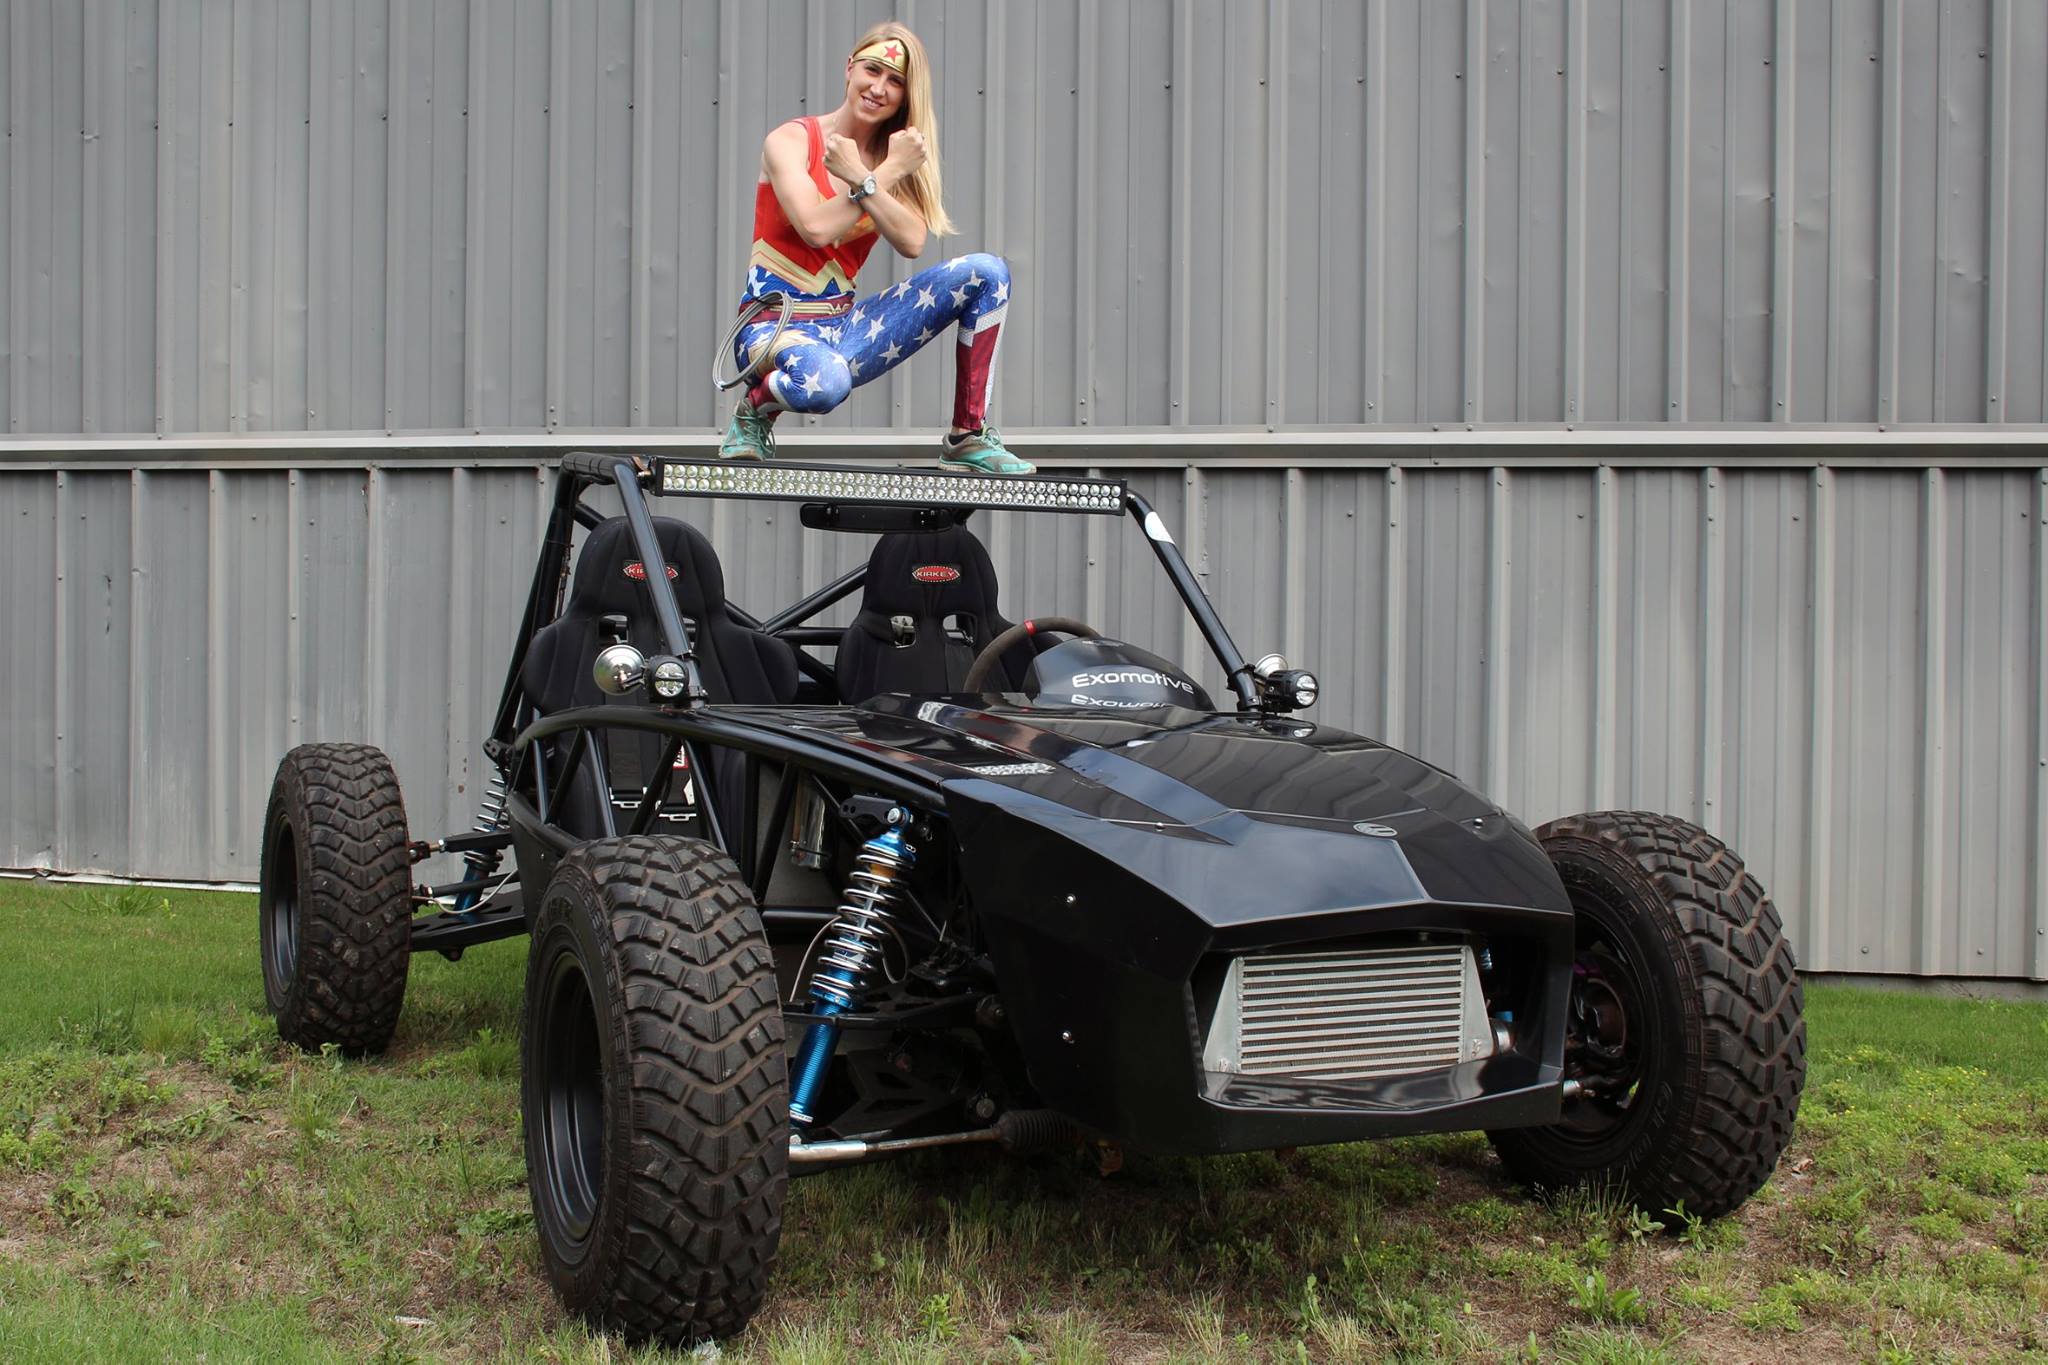 Exomotive’s own WonderWoman doesn’t need an invisible jet.